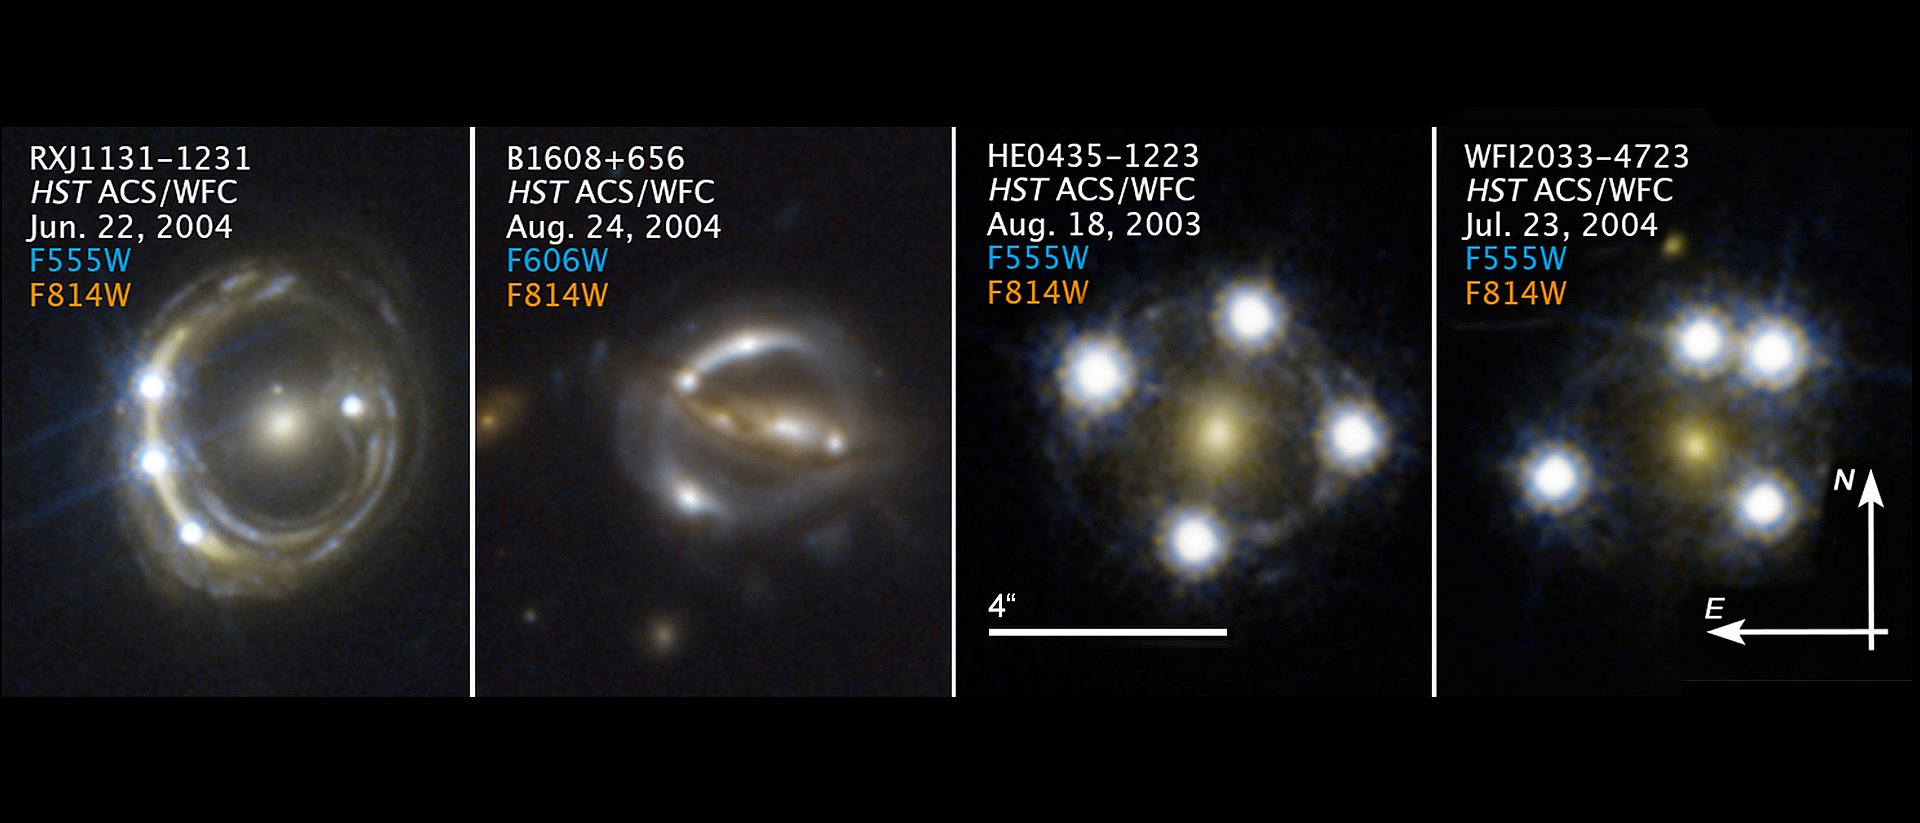 Hubble Space Telescope images of faraway quasars lensed by foreground galaxies that were used to measure the Hubble constant. (Image: S.H. Suyu / TUM/MPA; K.C. Wong / Univ. Tokyo; NASA; ESA)